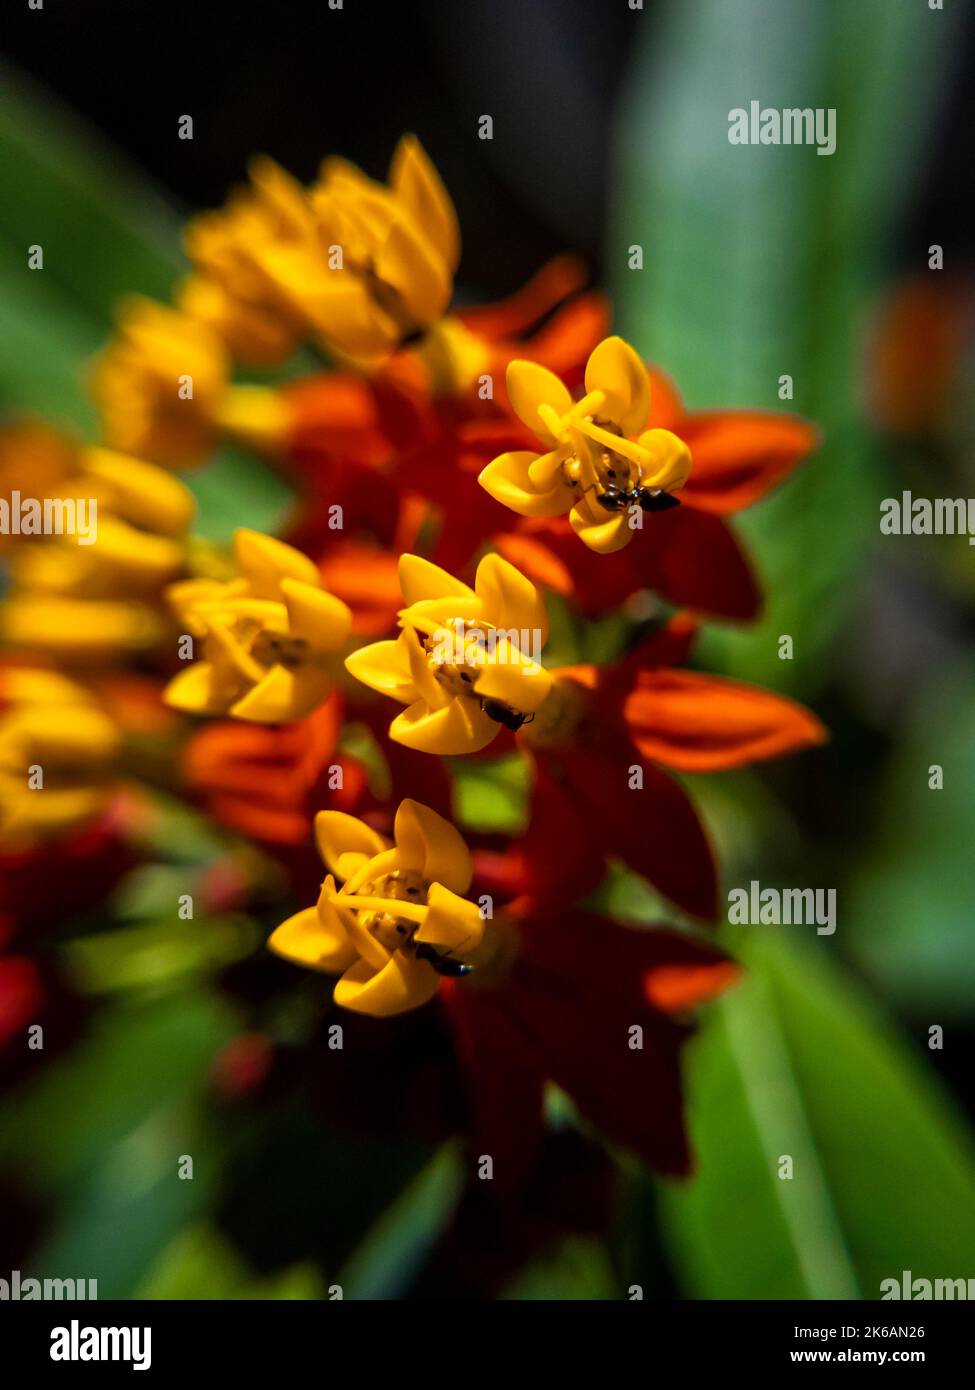 Asclepias curassavica, commonly known as tropical milkweed, blood flower, cotton bush, hierba de la cucaracha, Mexican butterfly weed, redhead, wild Stock Photo